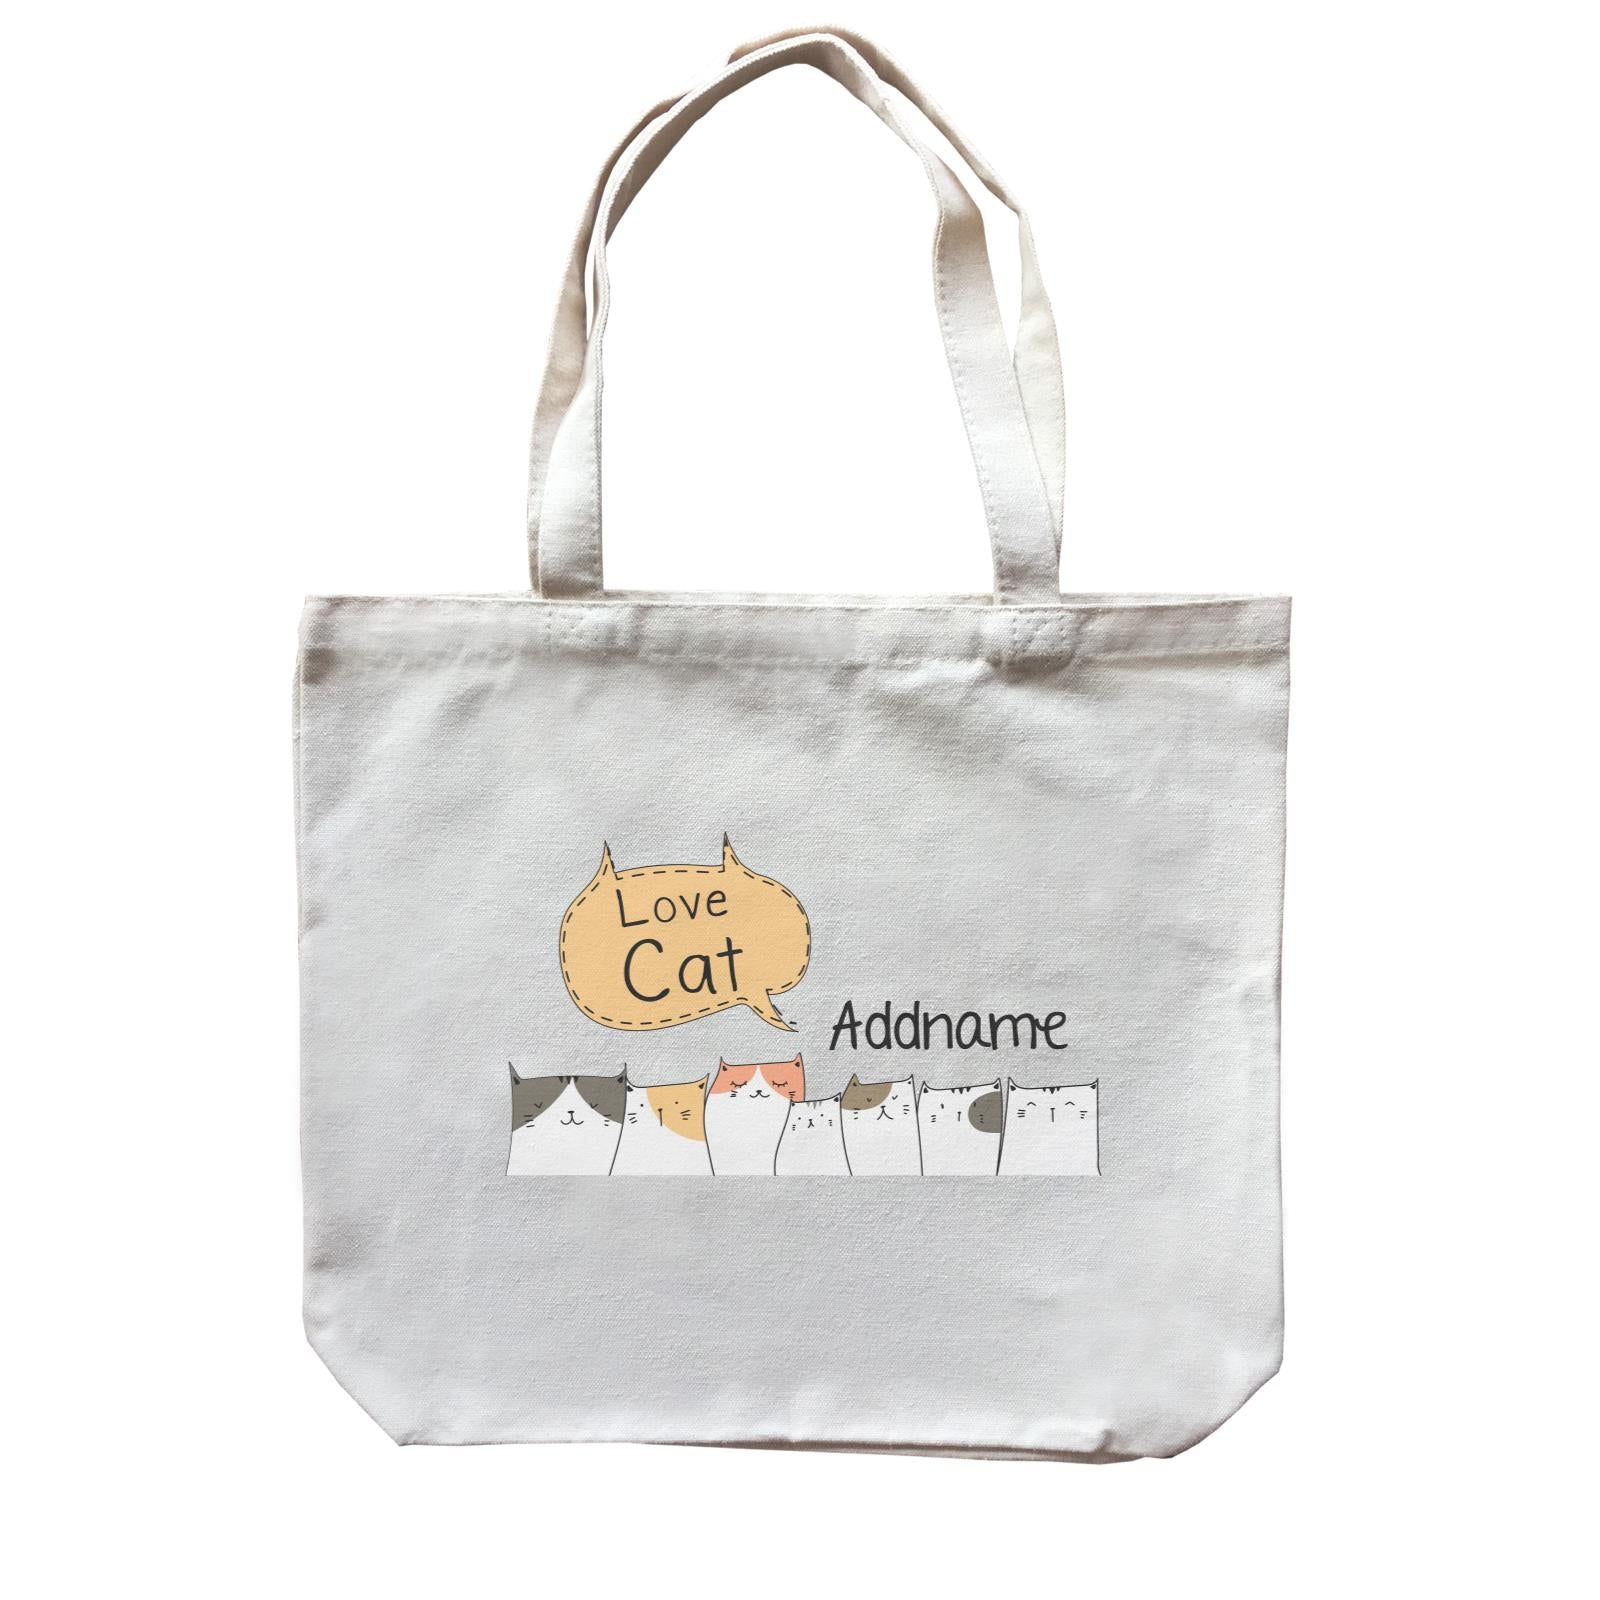 Cute Animals And Friends Series Love Cat Cats Group Addname Canvas Bag